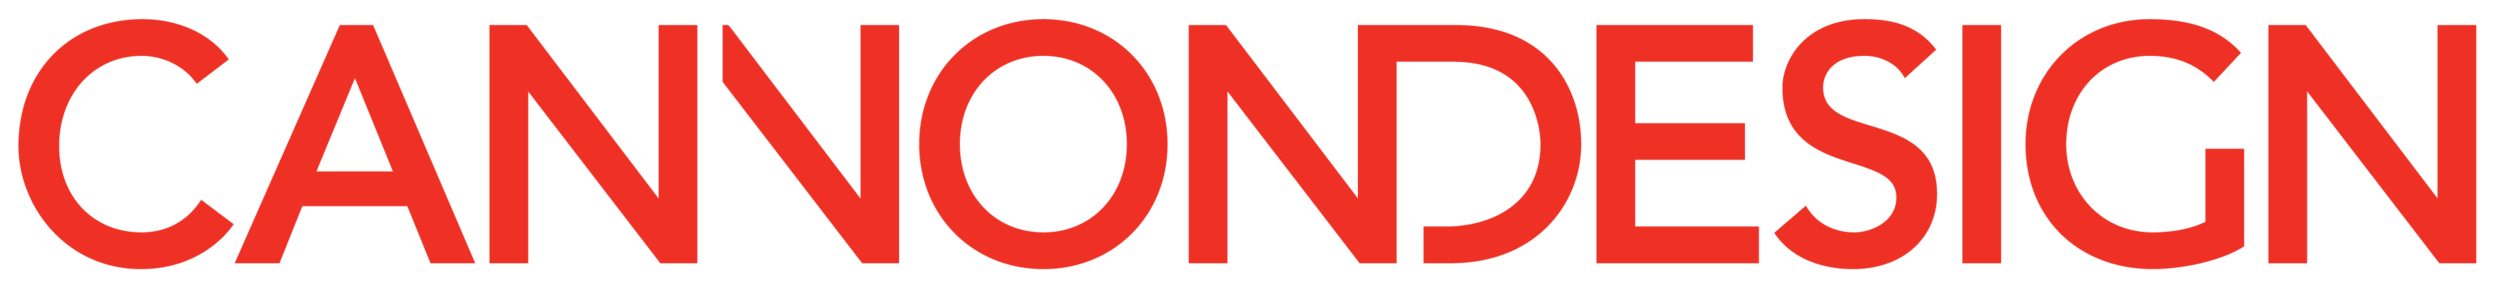 CANNONDESIGN_LOGO.png